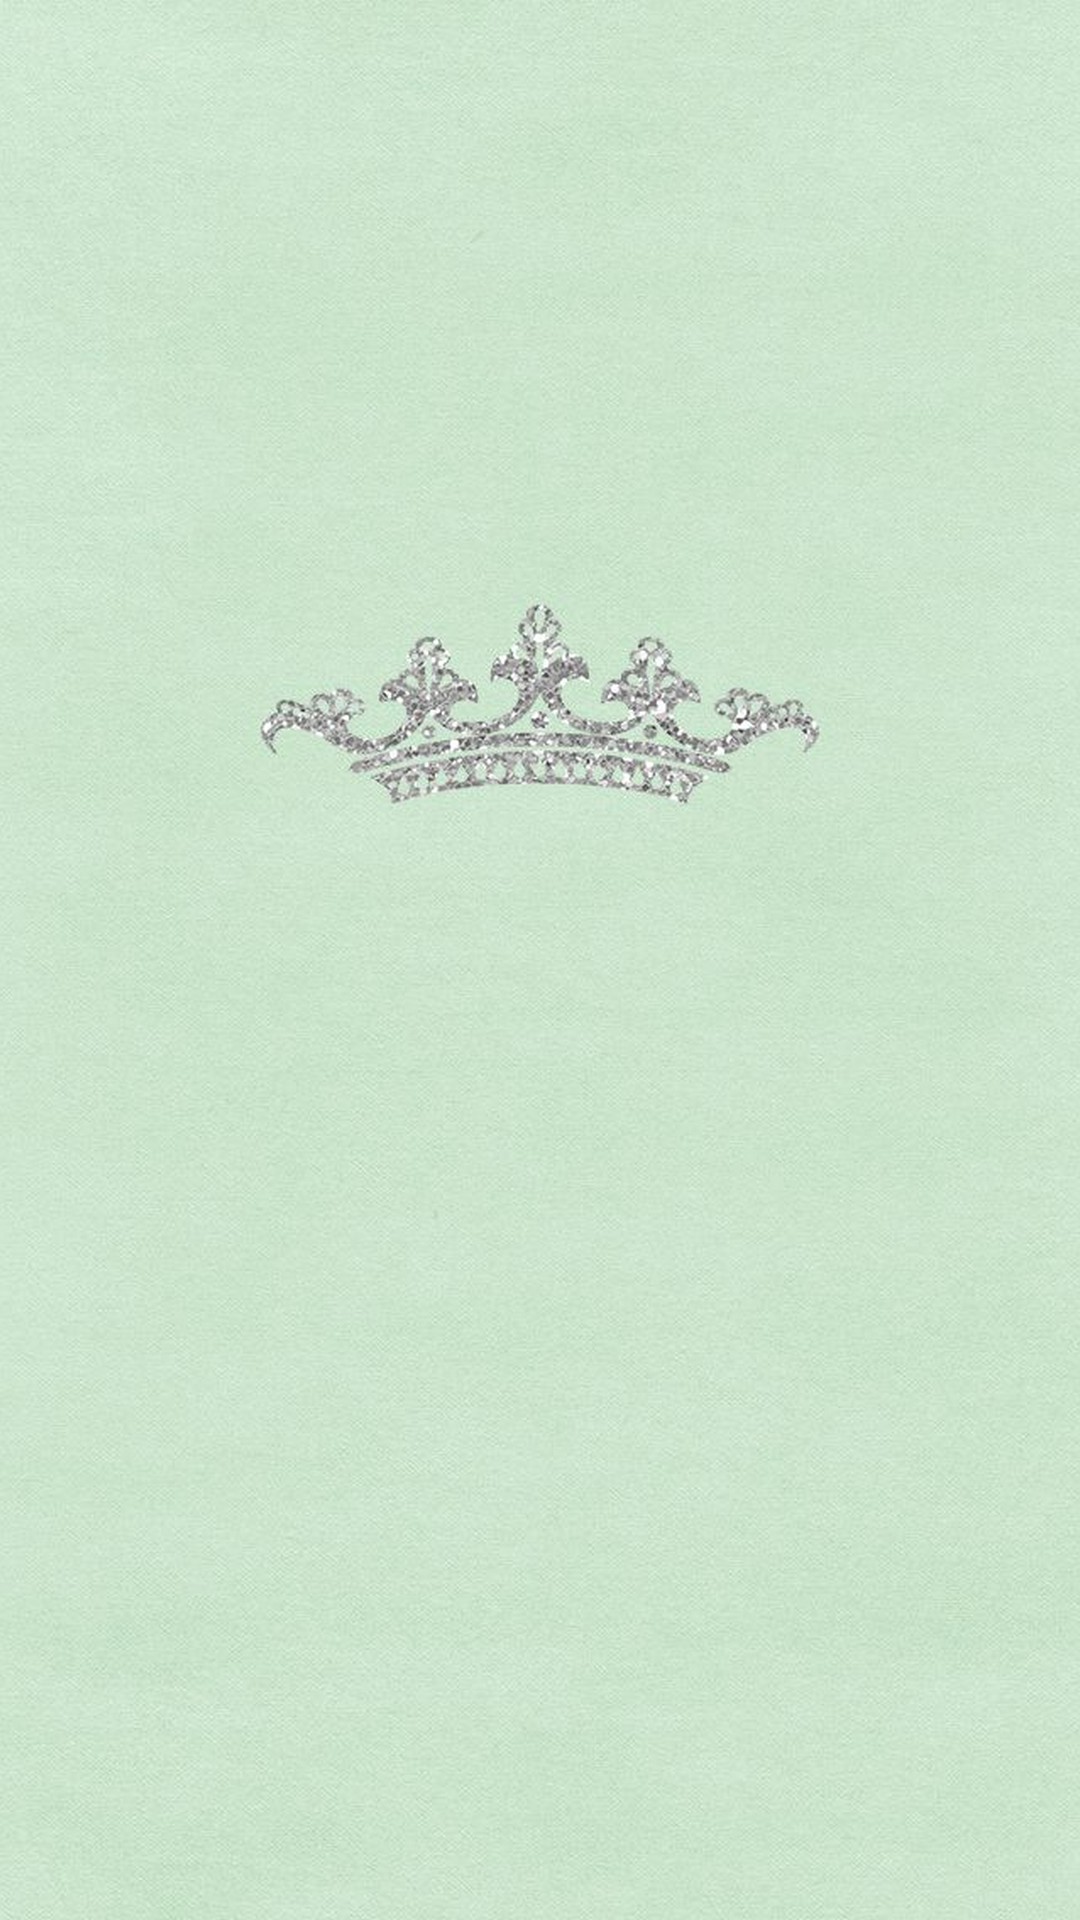 Mint Green Phone Wallpaper with high-resolution 1080x1920 pixel. Download all Mobile Wallpapers and Use them as wallpapers for your iPhone, Tablet, iPad, Android and other mobile devices